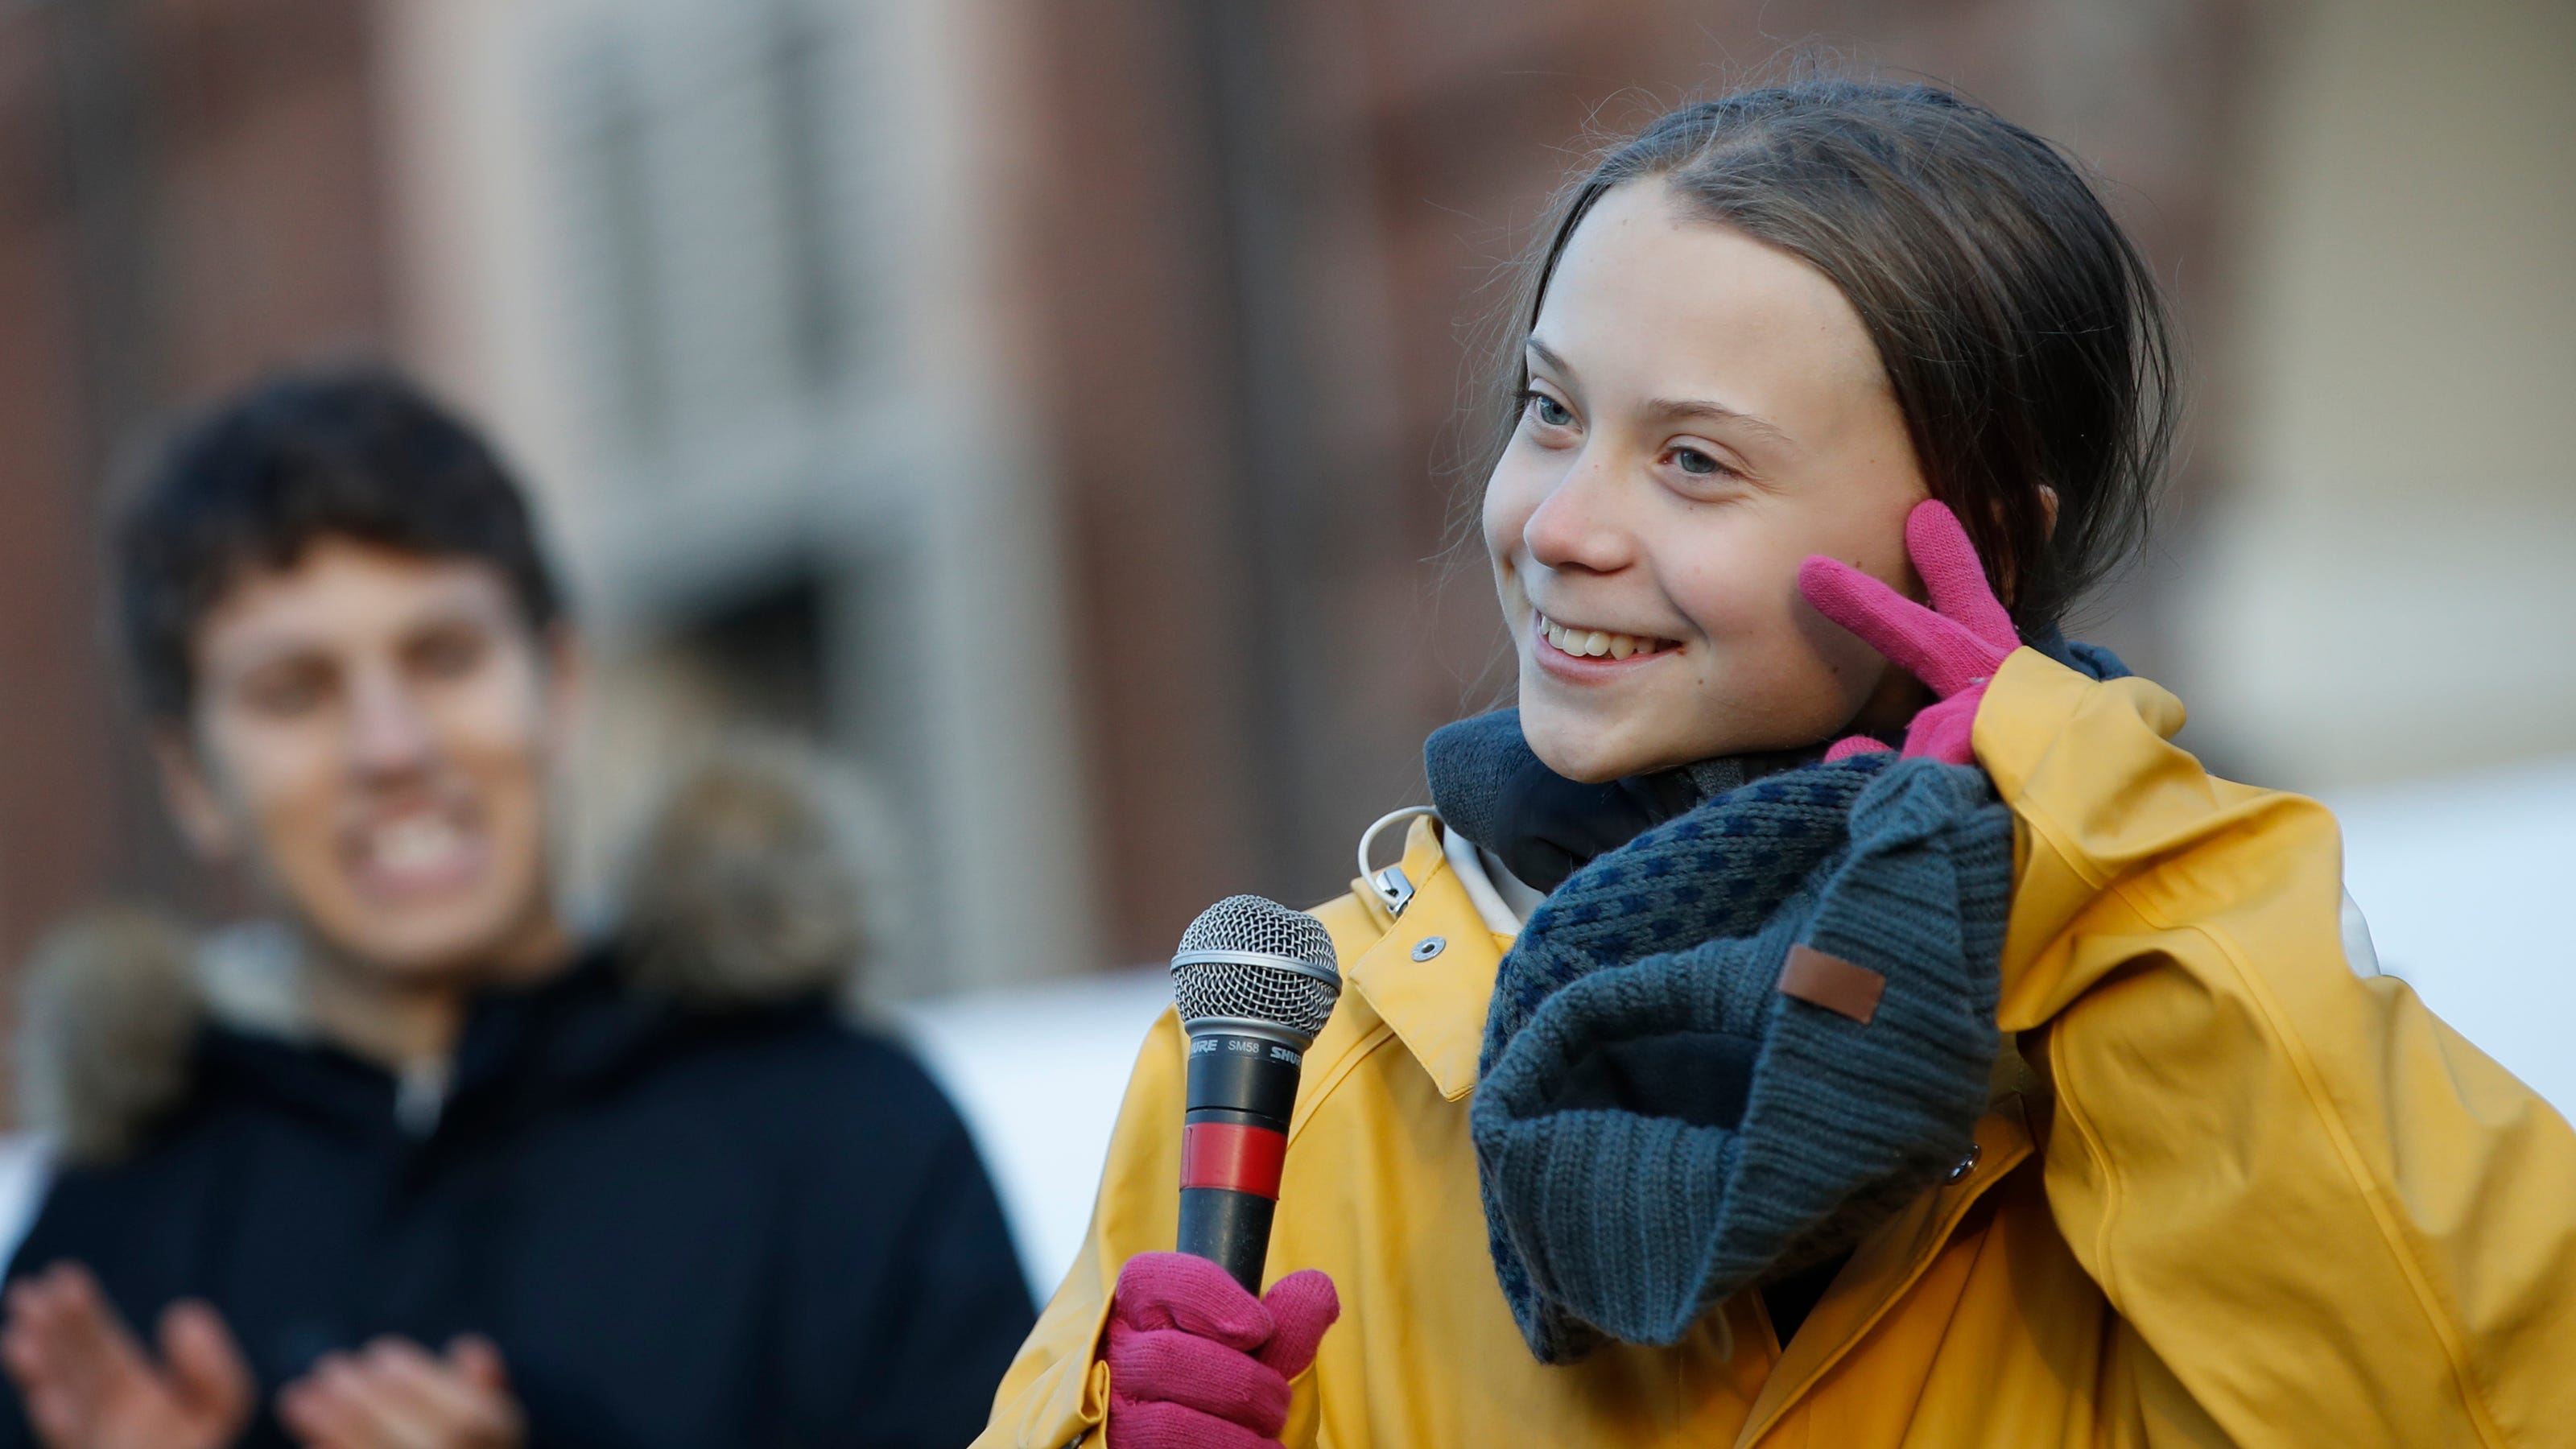 Greta Thunberg is fed up over climate change. So are these teens, who can't vote but are seizing 'youth power' - USA TODAY